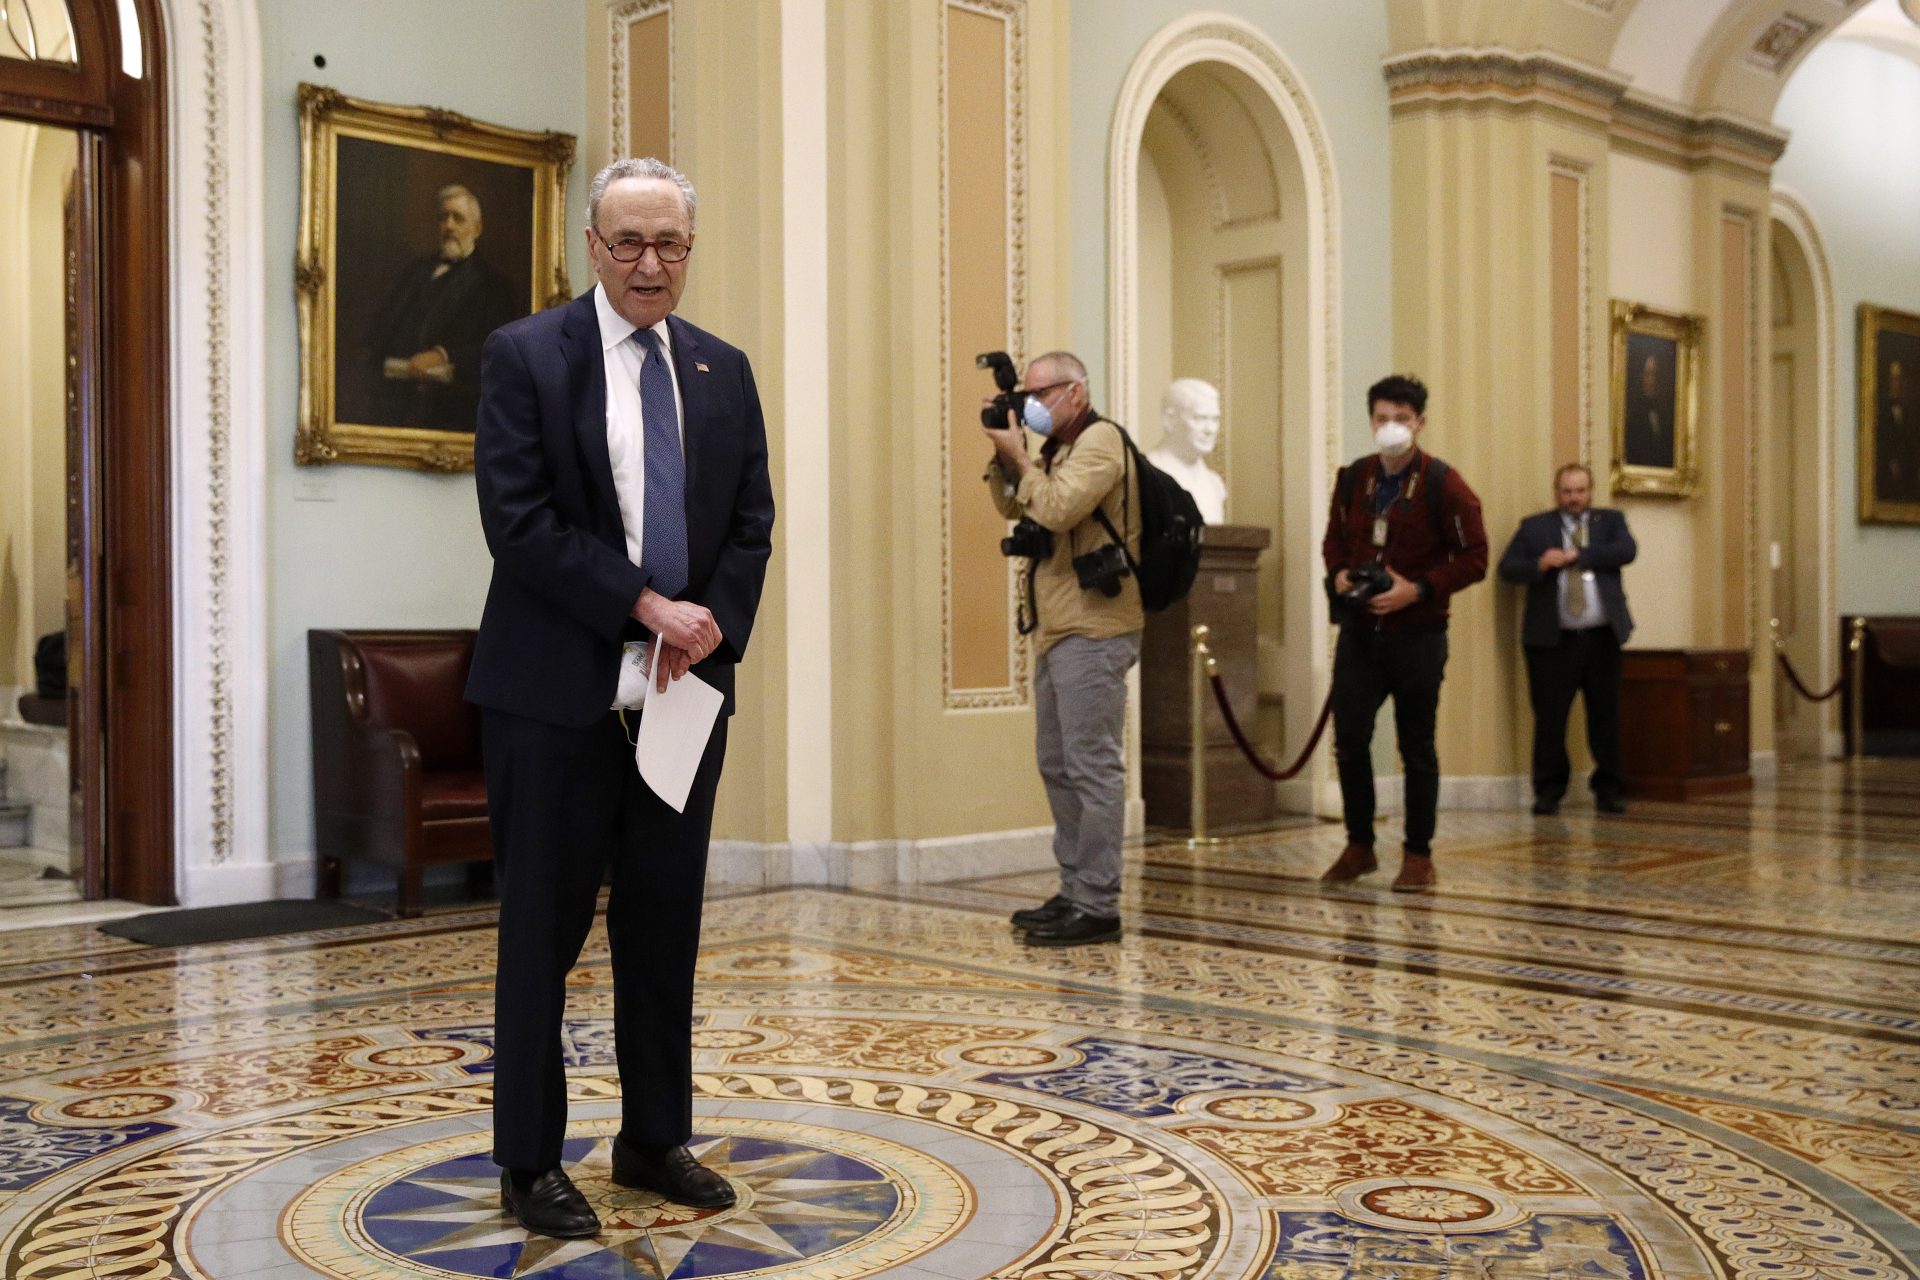 In this April 21, 2020, file photo Senate Minority Leader Sen. Chuck Schumer of N.Y. speaks with reporters outside the Senate chamber on Capitol Hill in Washington. The Senate is set to resume Monday, May 4.